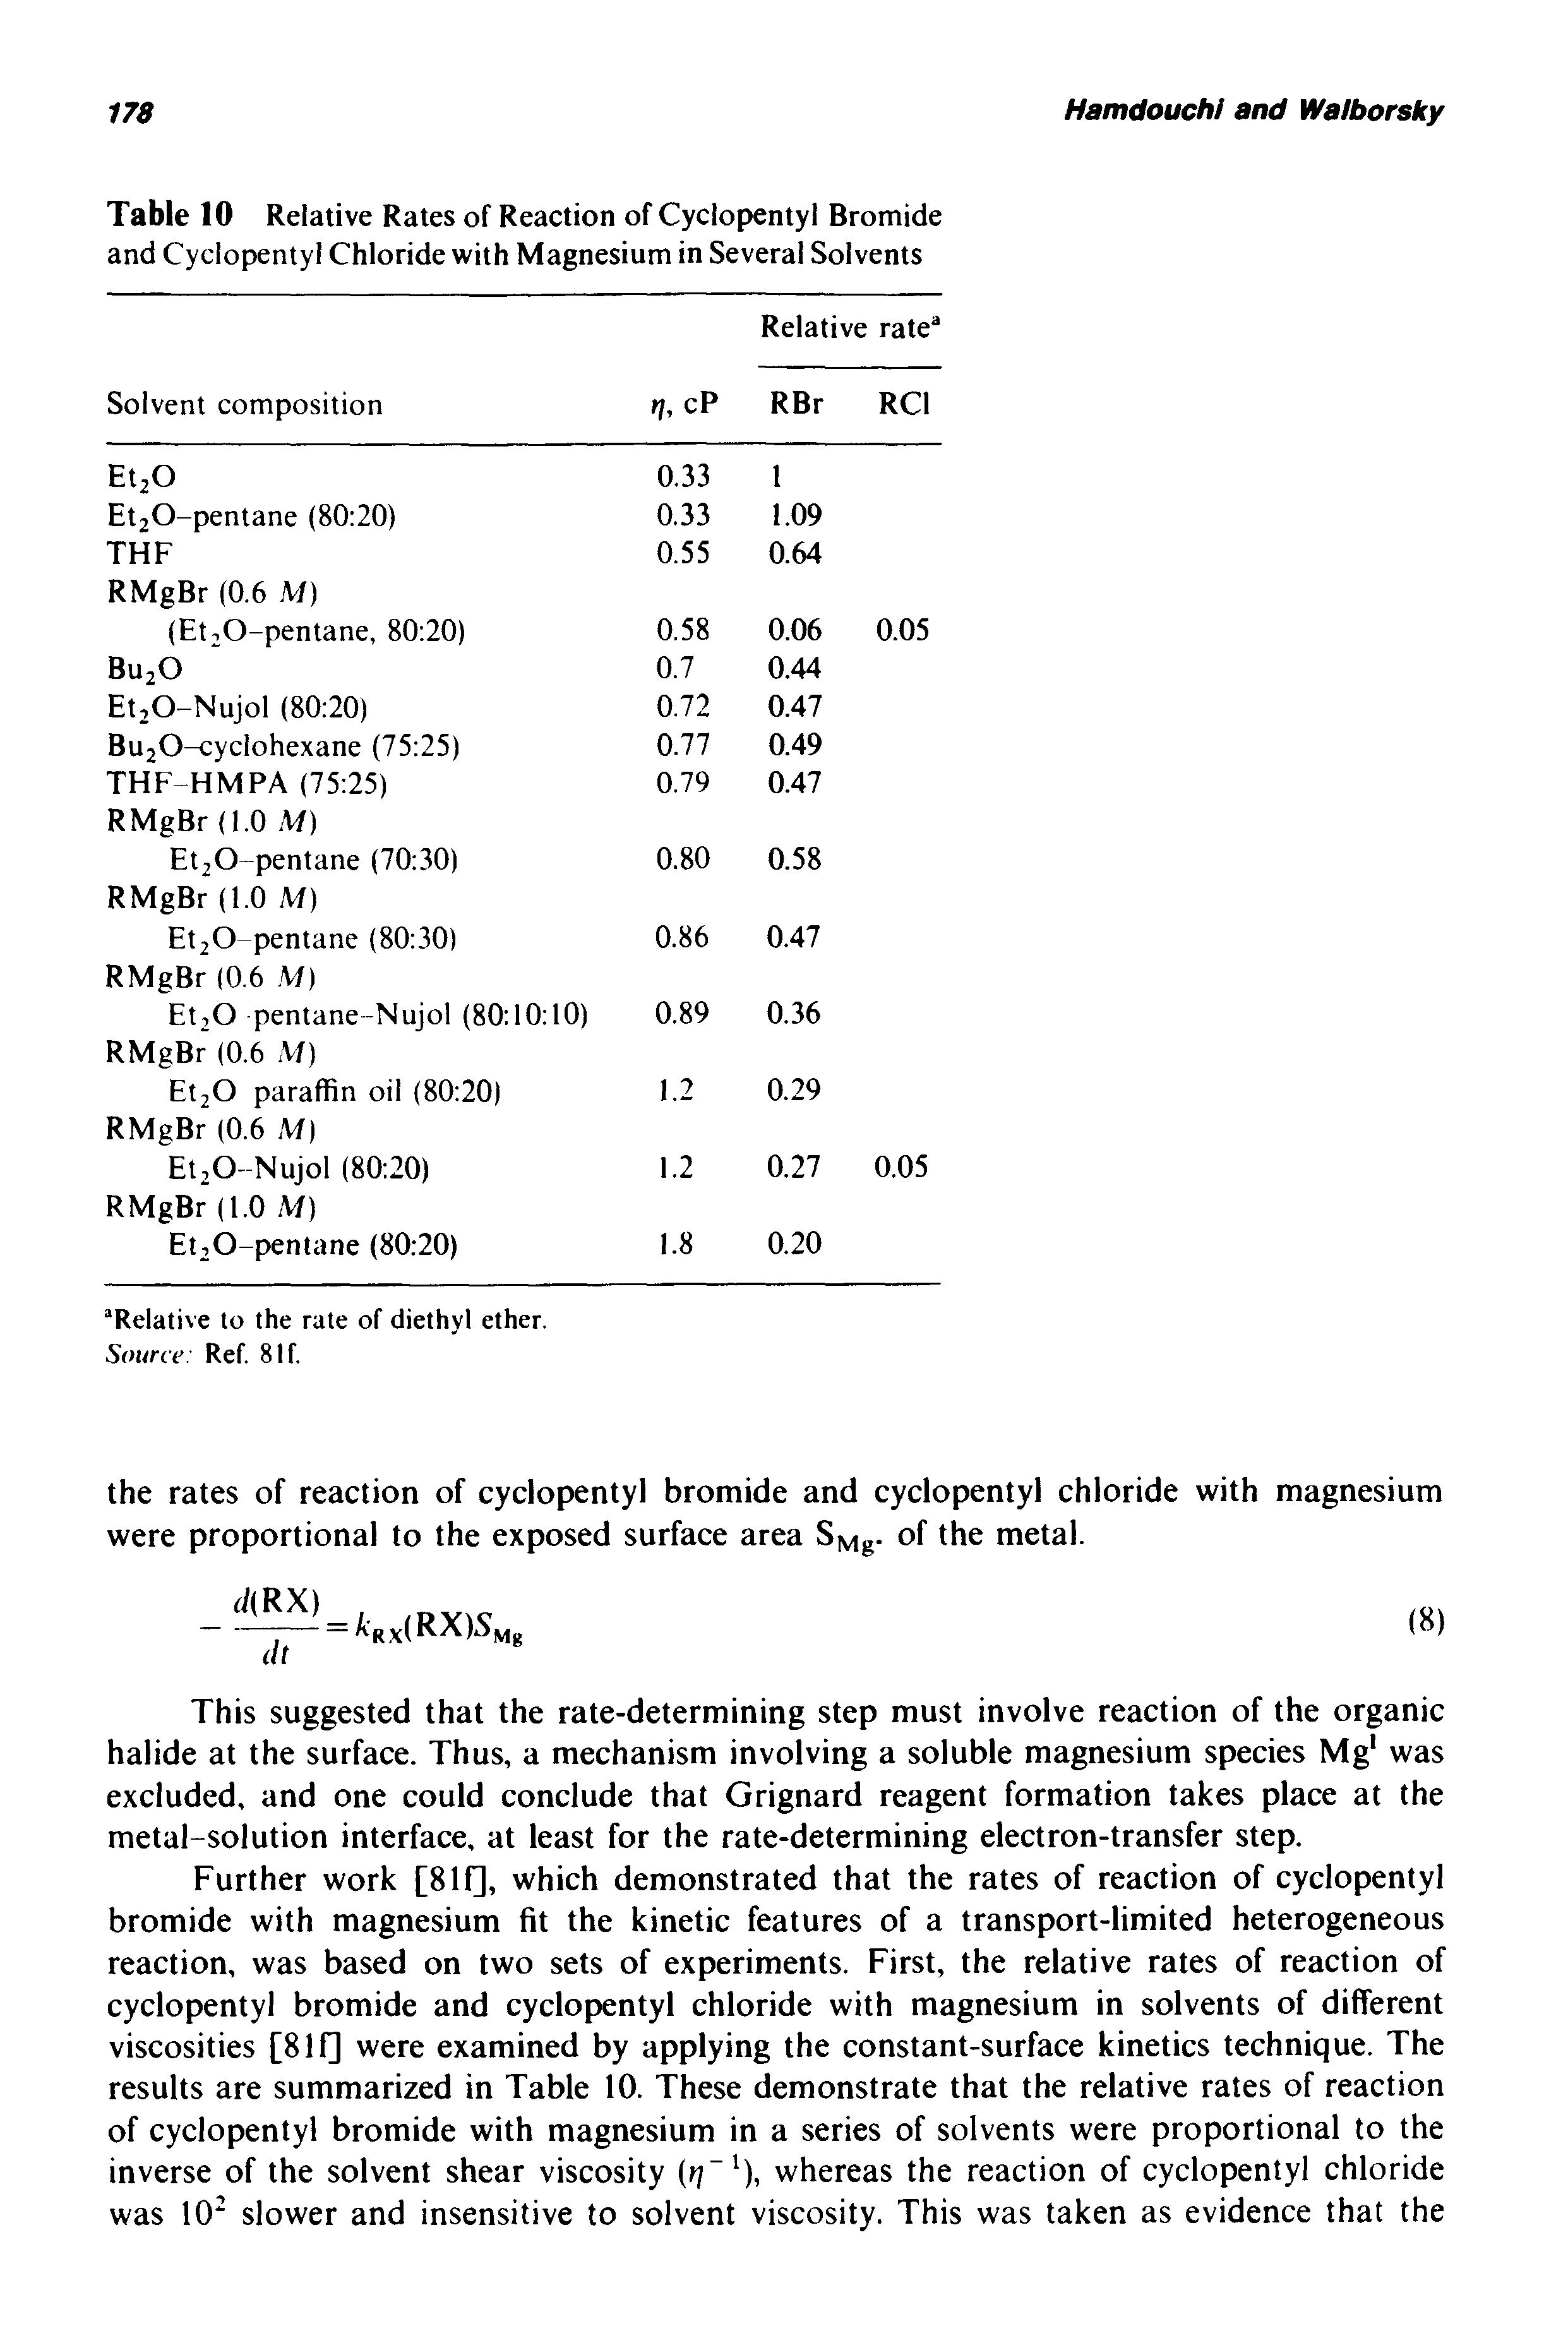 Table 10 Relative Rates of Reaction of Cyclopentyl Bromide and Cyclopentyl Chloride with Magnesium in Several Solvents...